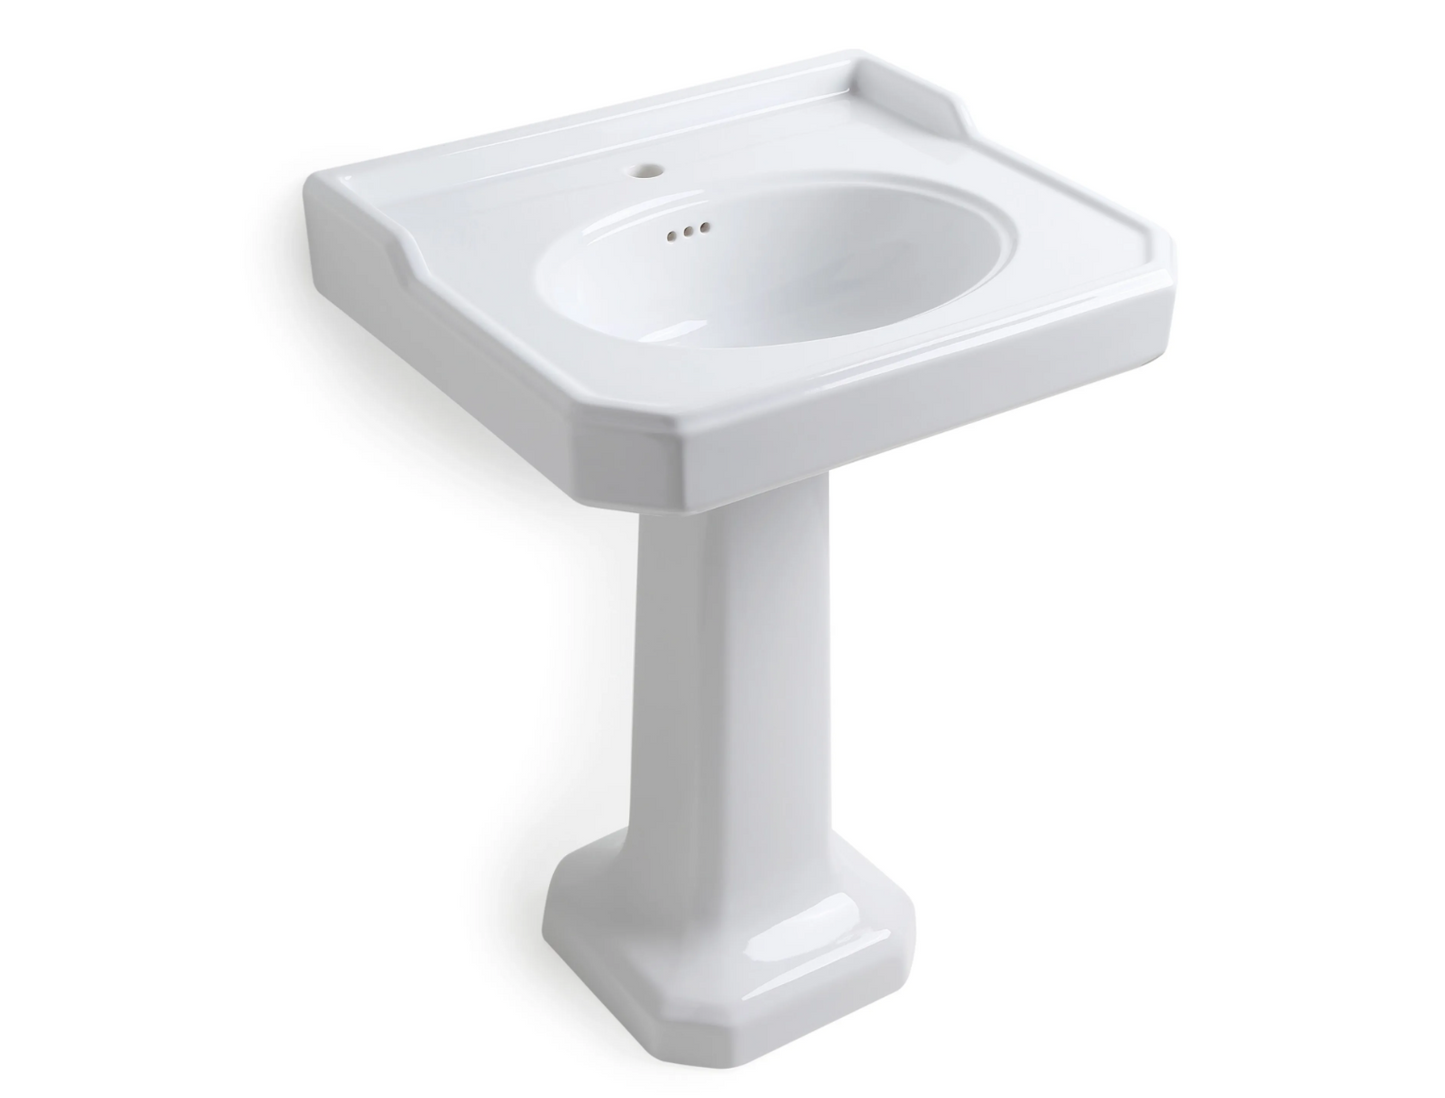 Small ceramic pedestal sink Provence 700 by Balneo Toscia Classic style